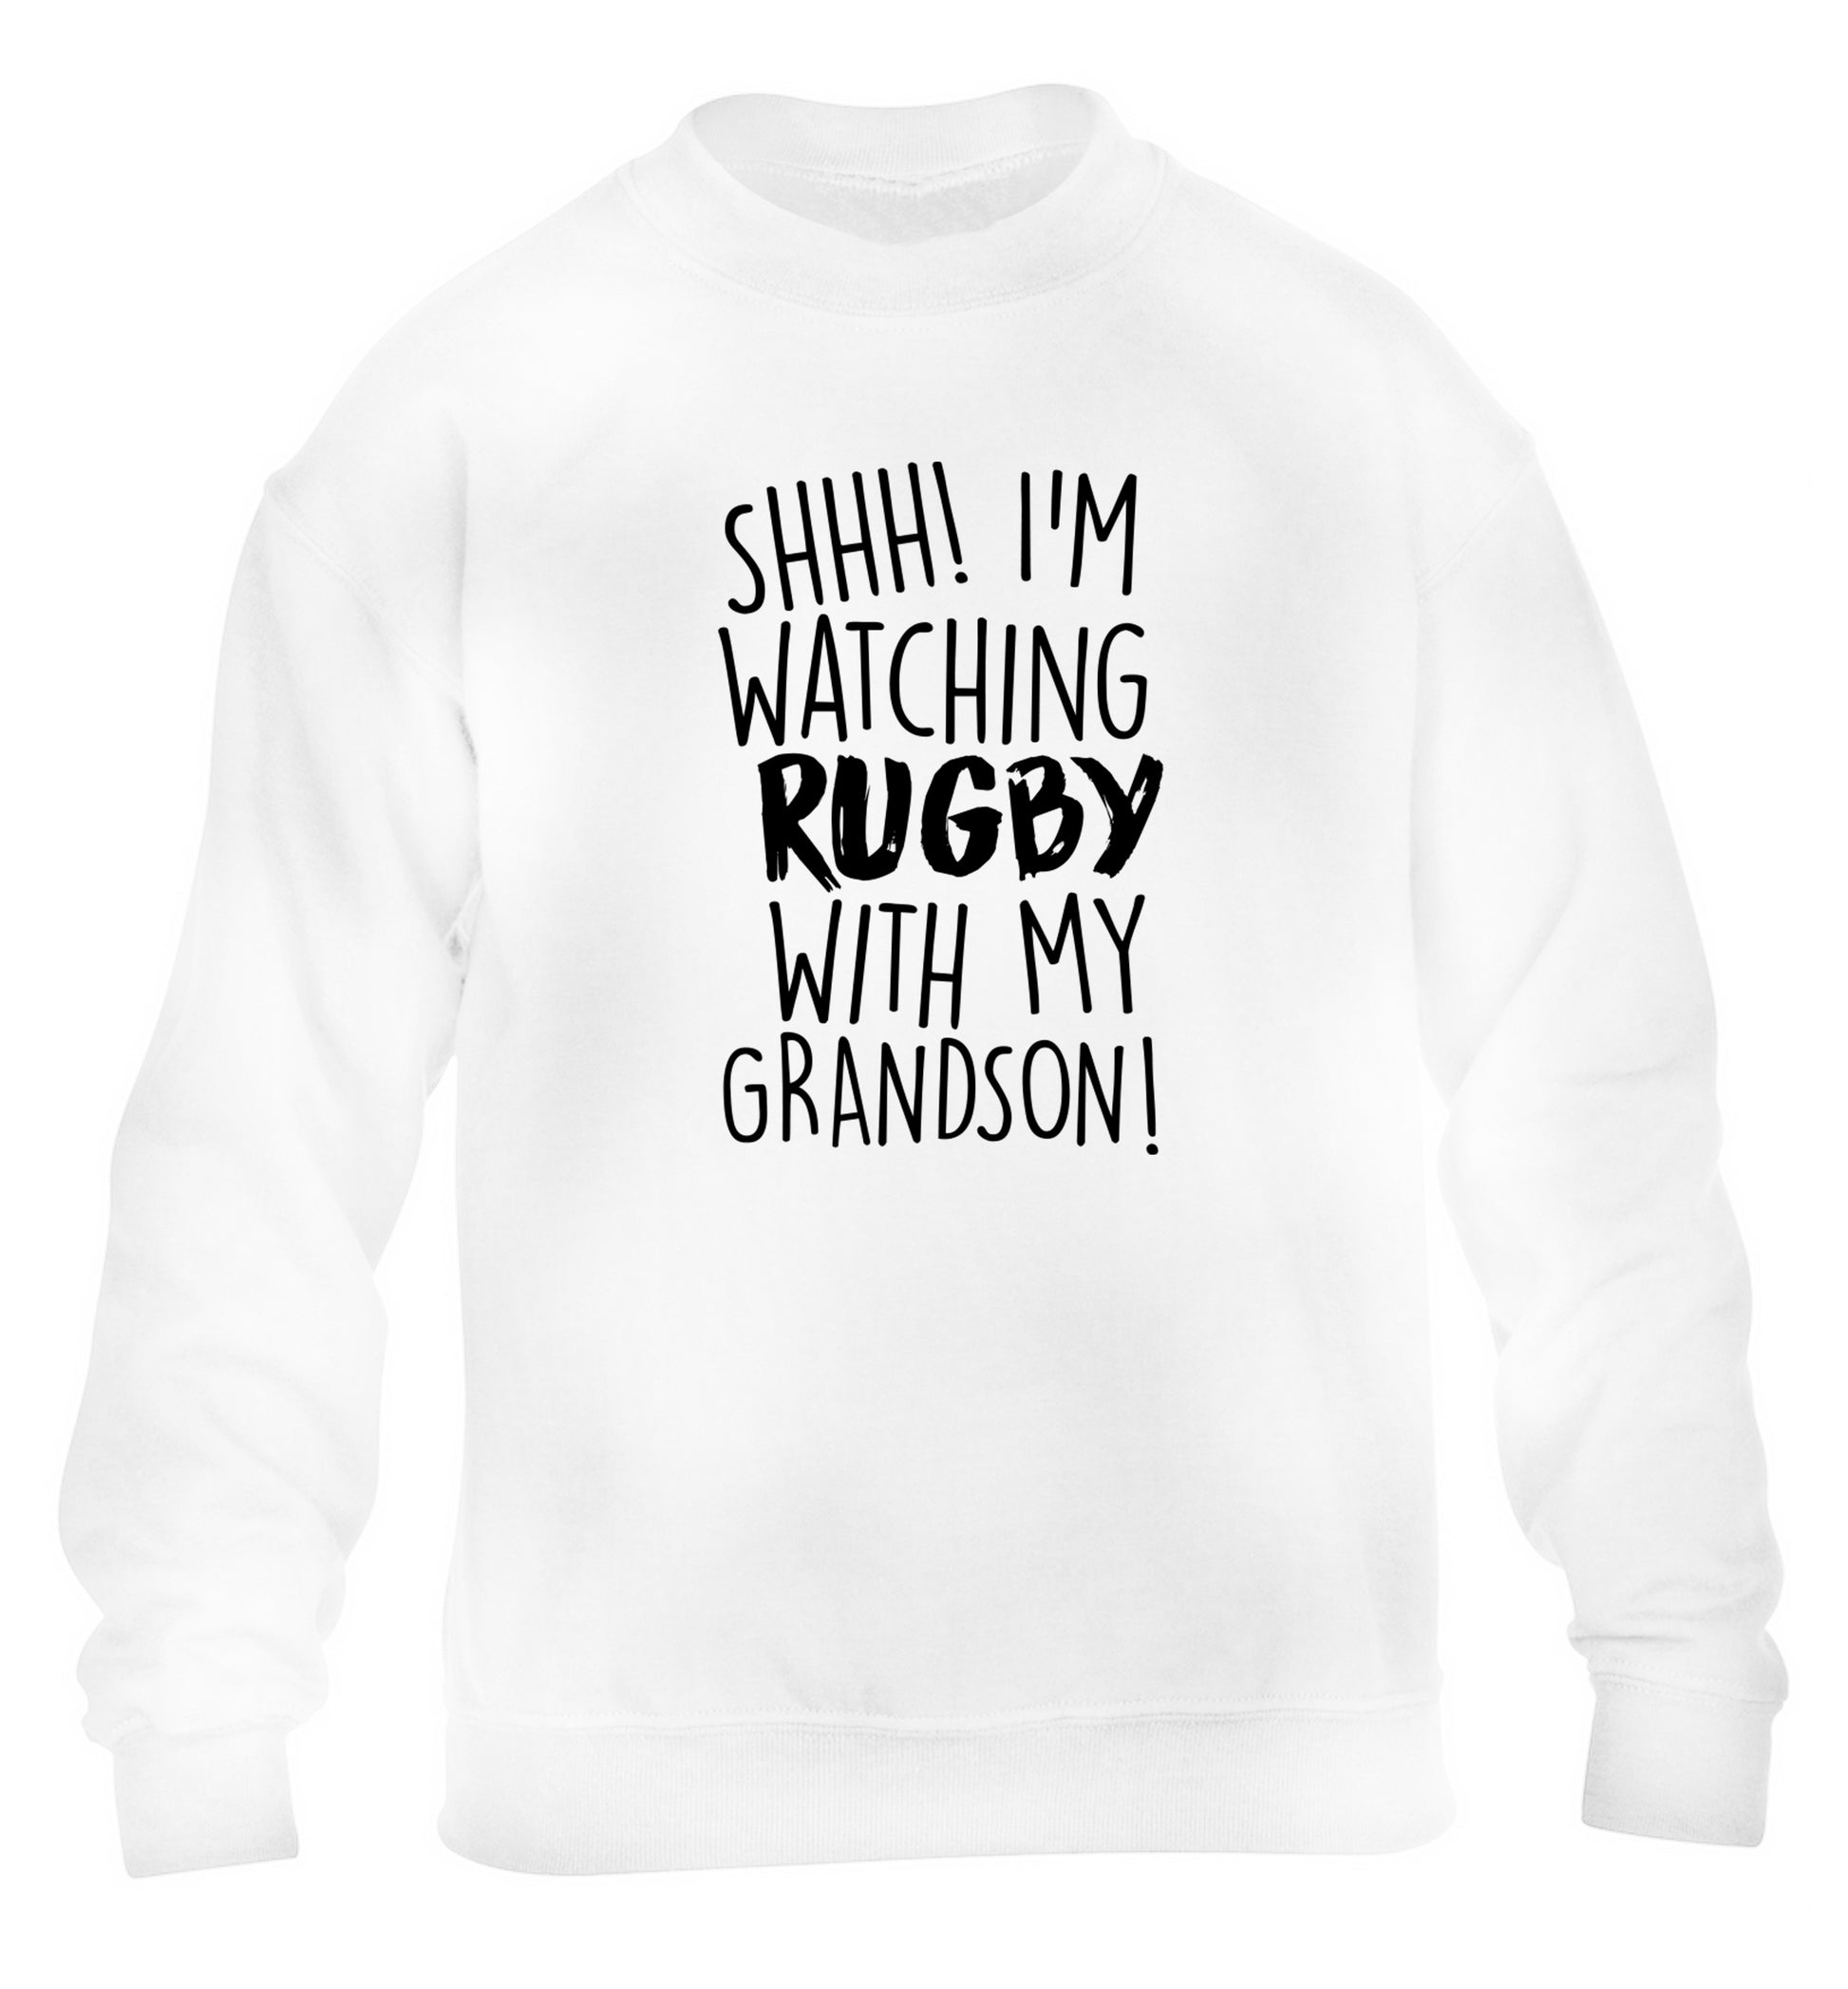 Shh I'm watching rugby with my grandson children's white sweater 12-13 Years